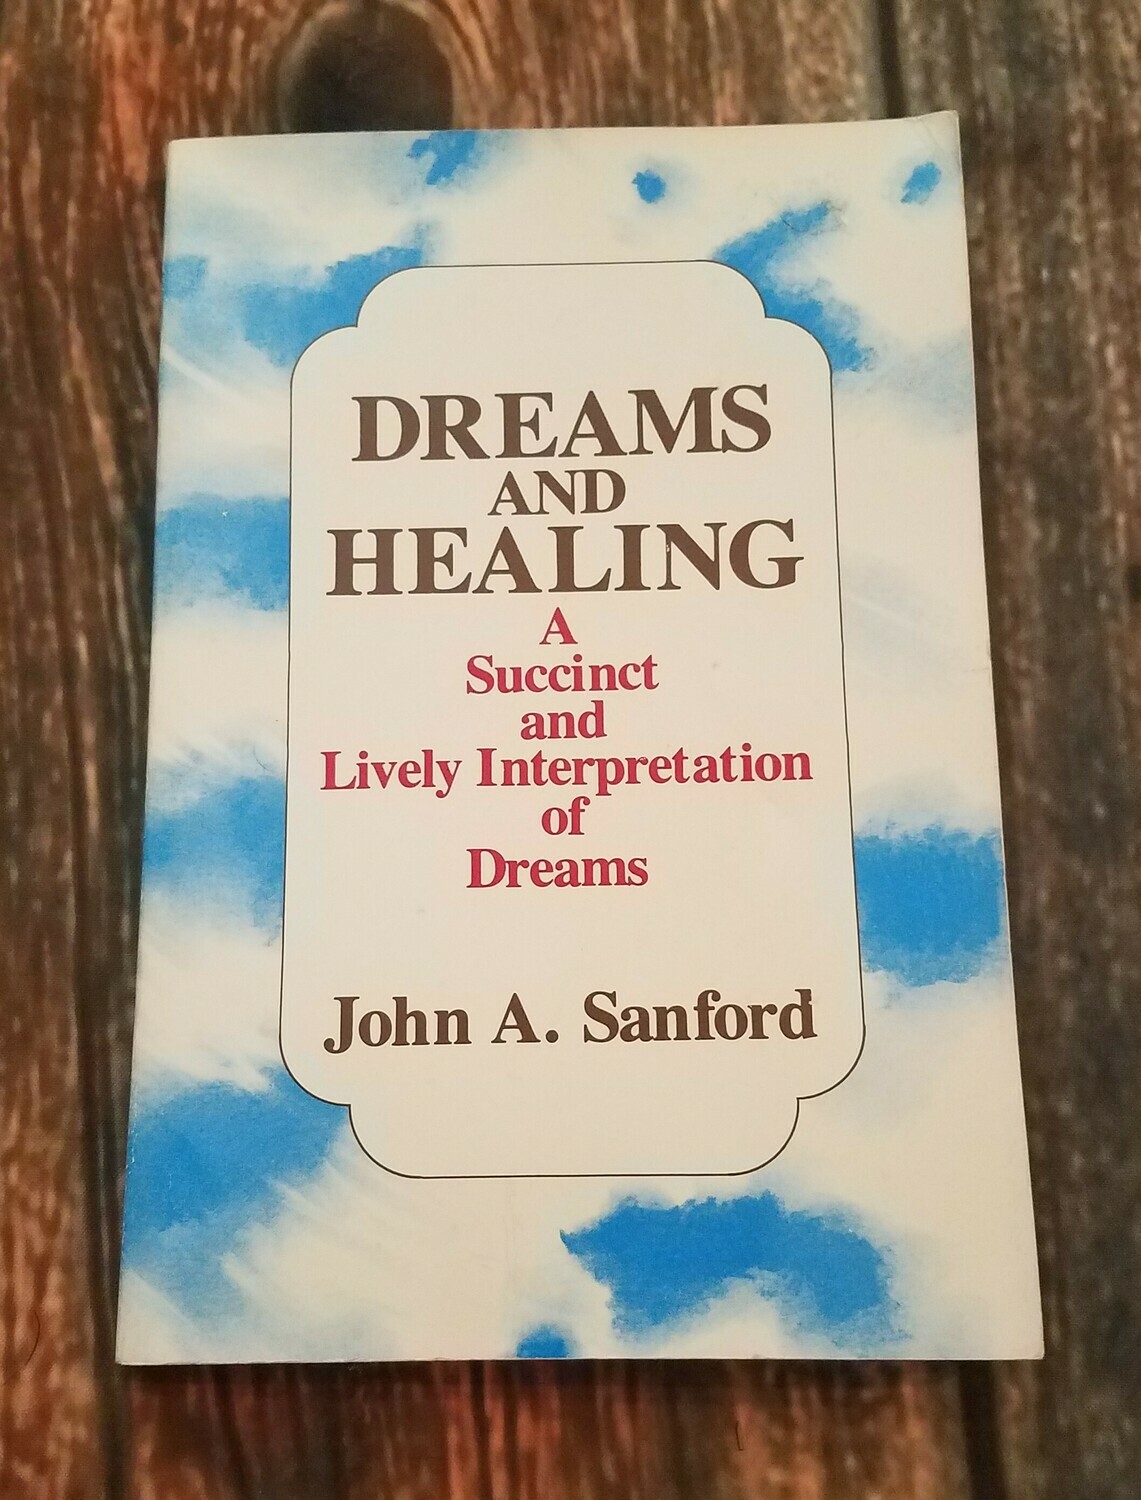 Dreams and Healing: A Succinct and Lively Interpretation of Dreams by John A. Sanford